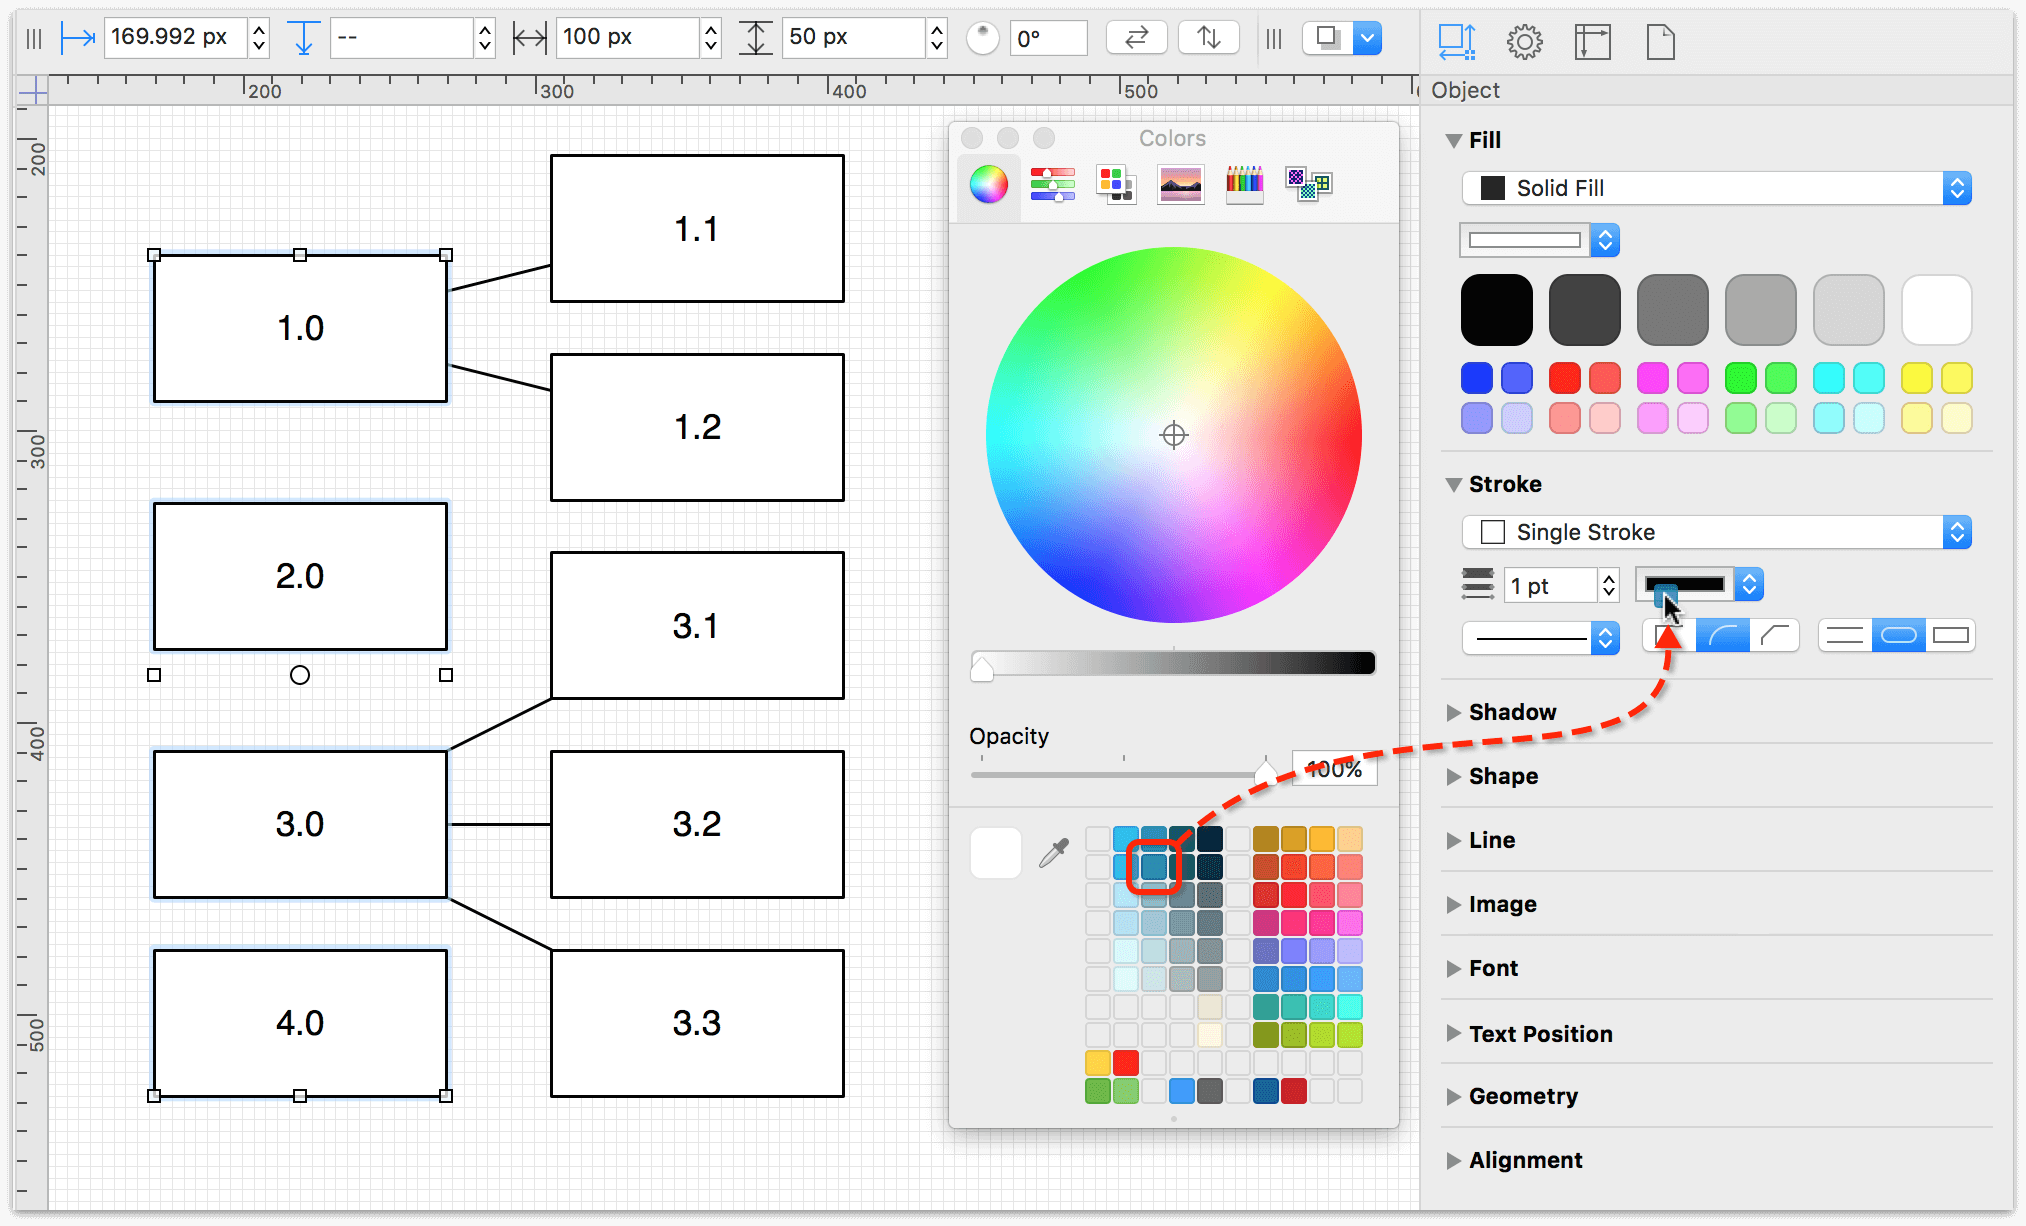 Dragging colors from the color well to a color object